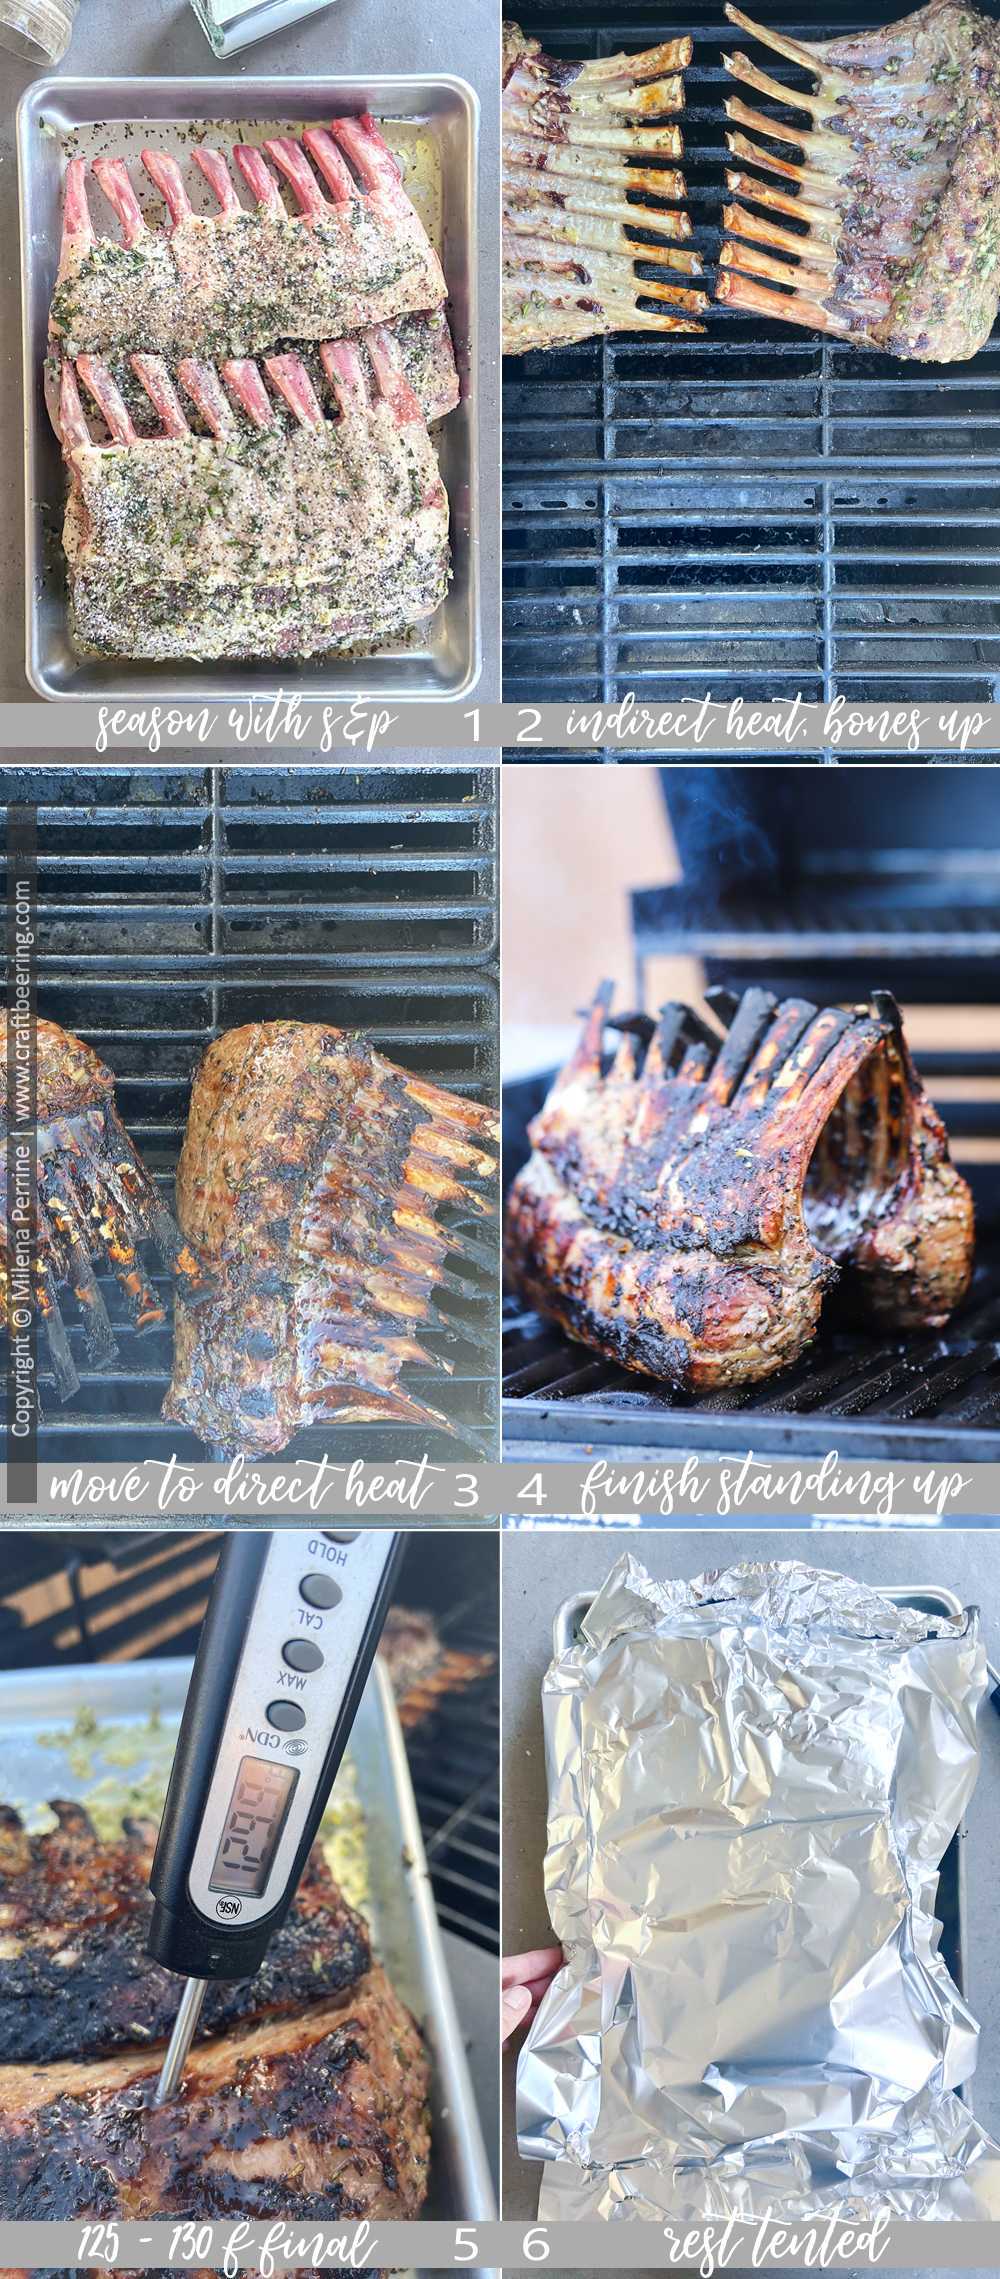 How to grill rack of lamb 